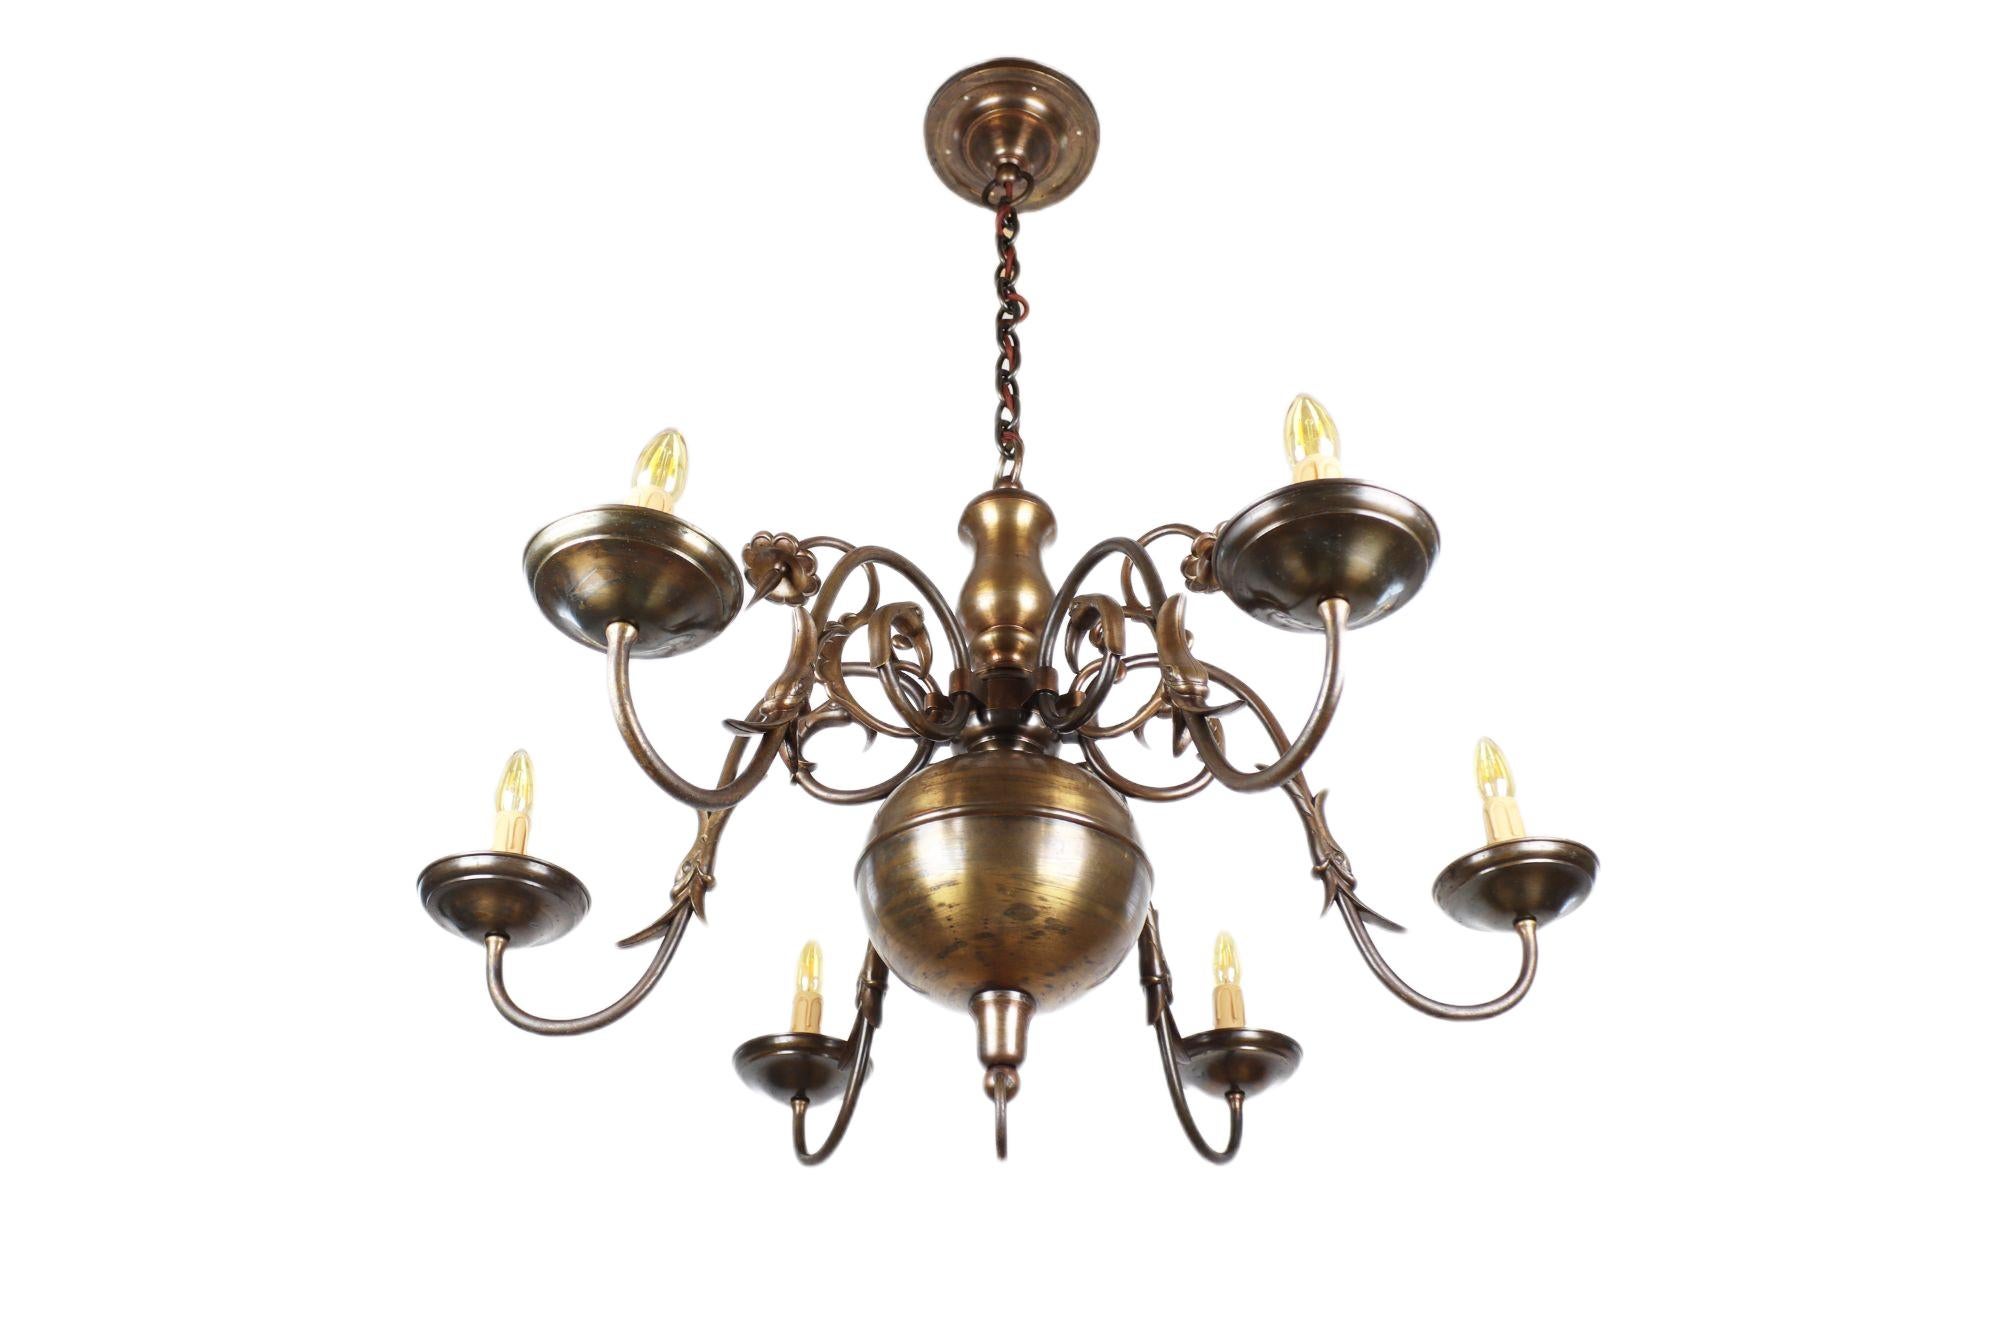 This beautiful representative chandelier from the Art Nouveau period was made around 1918 in the former Austria-Hungary. You will find beautiful decorations in the form of figures on it. The six large arms are finished with candle-shaped sleeves.